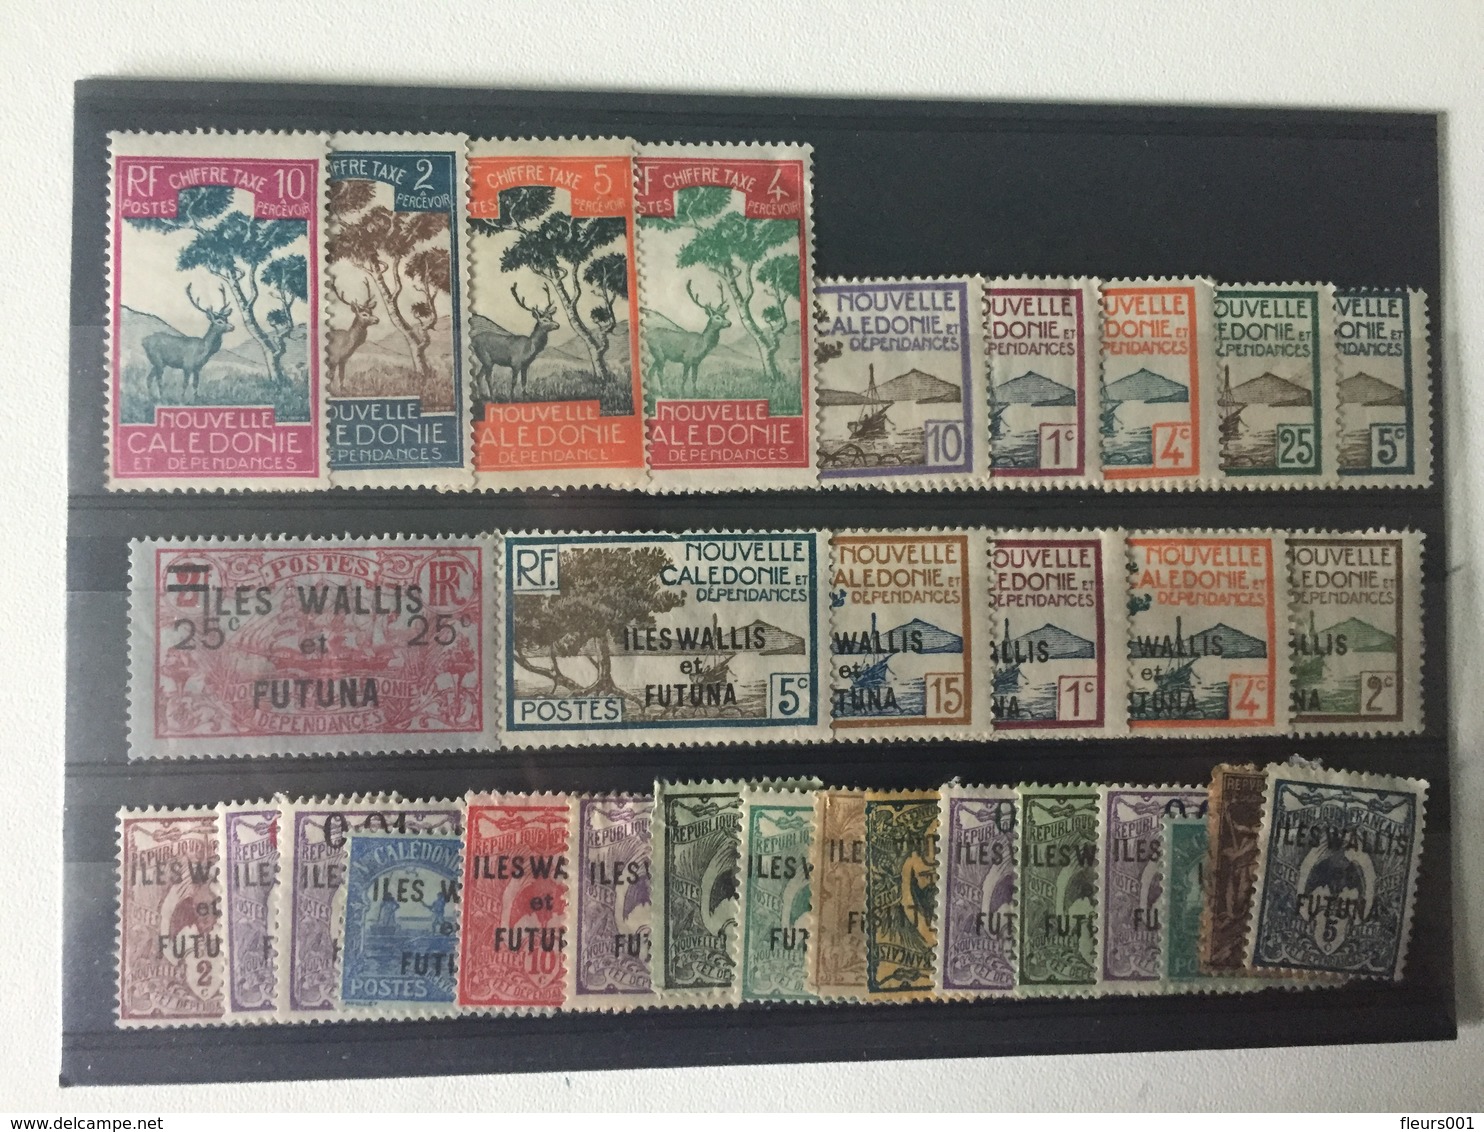 Wales Et Futuna: * Stamps - Used Stamps